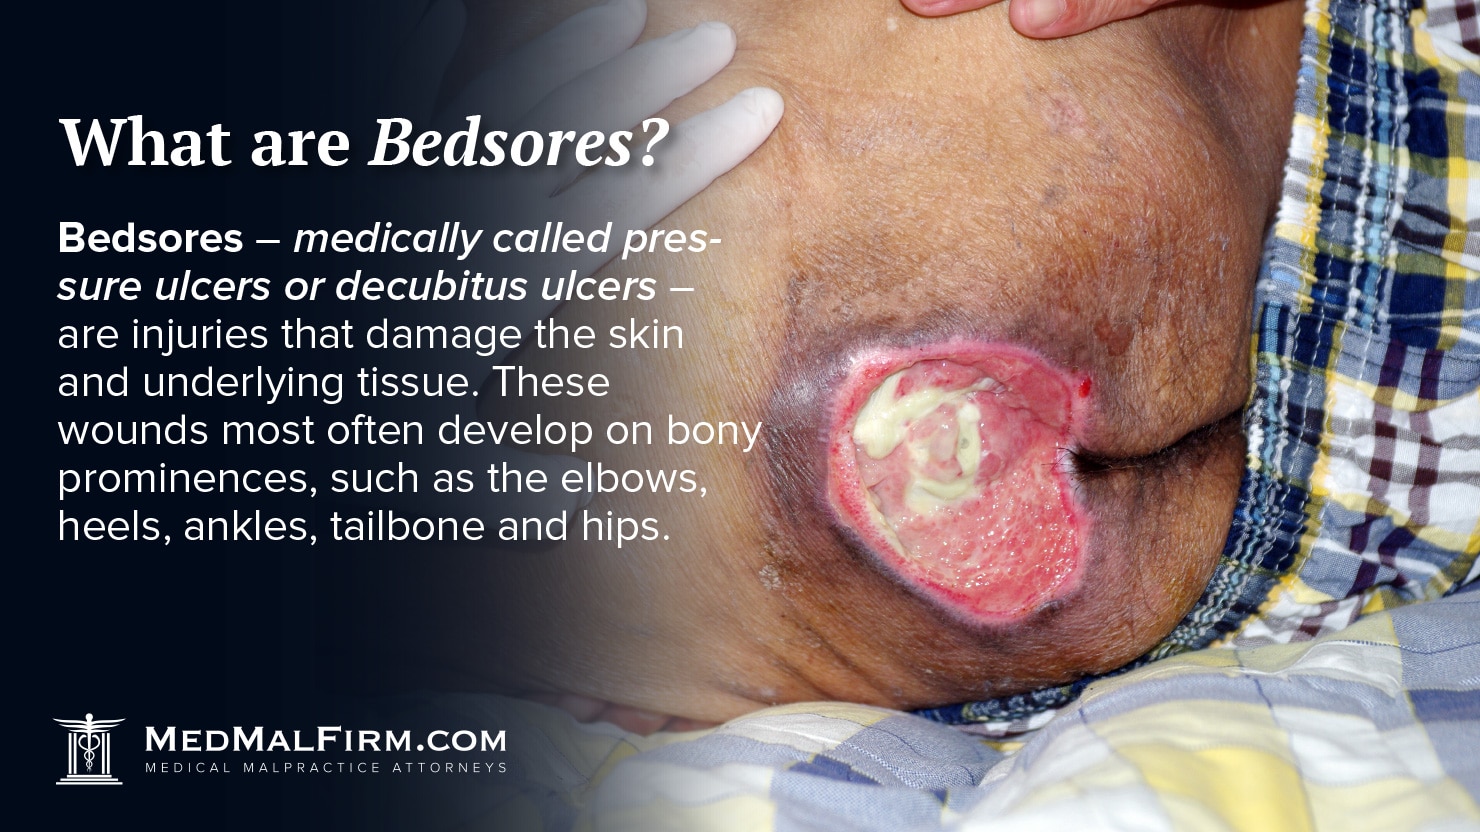 what are bedsores?